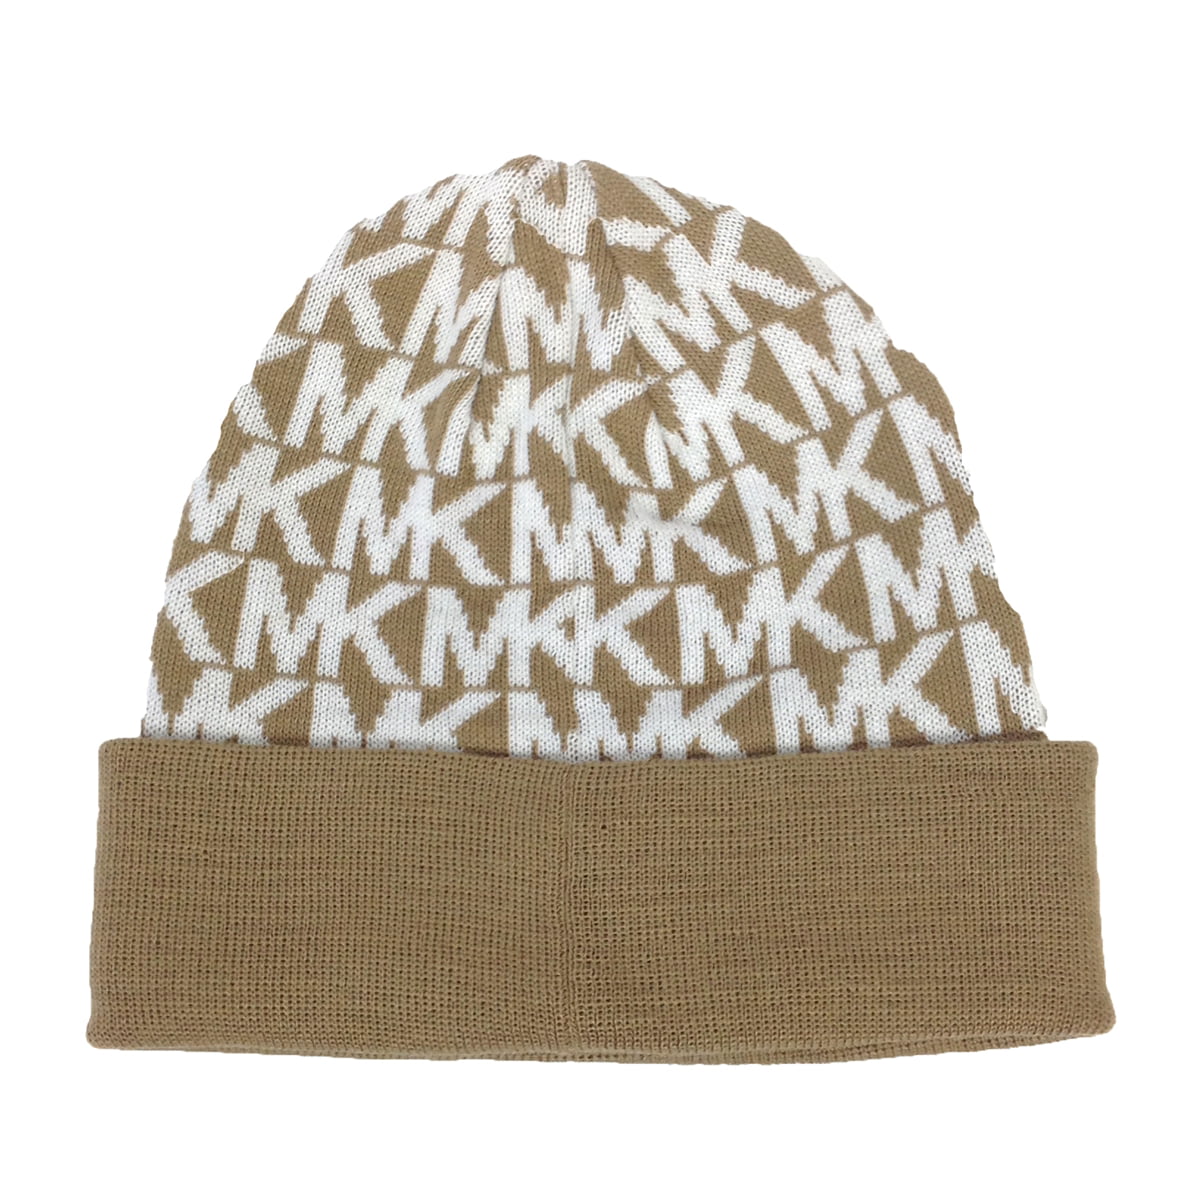 Michael Kors MK Repeat Logo Knitted Beanie Hat, Camel /Cream, One Size ...